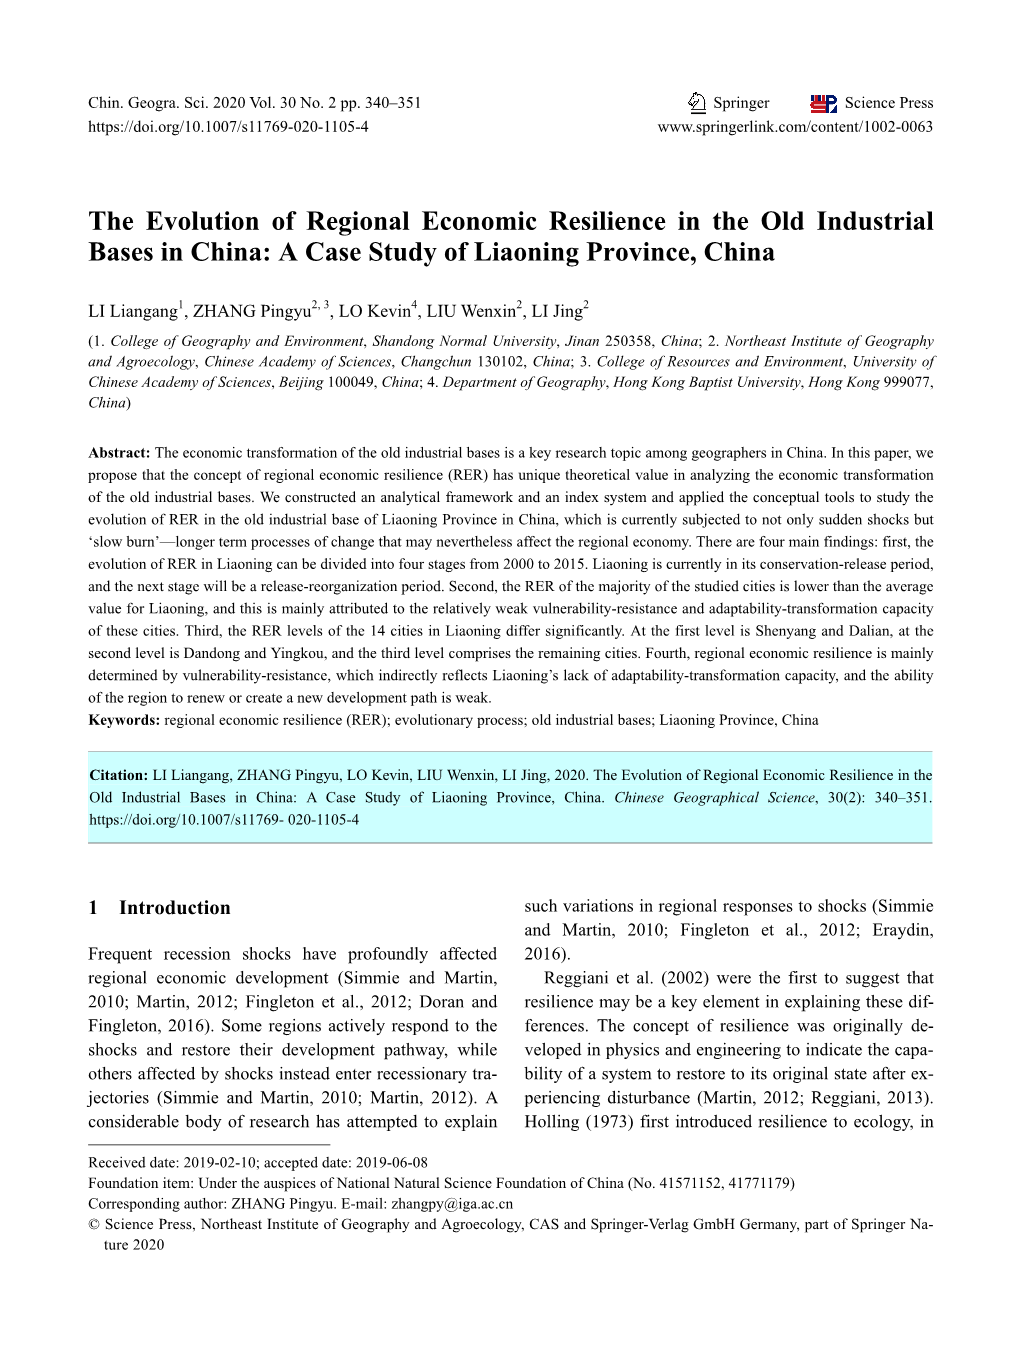 The Evolution of Regional Economic Resilience in the Old Industrial Bases in China: a Case Study of Liaoning Province, China